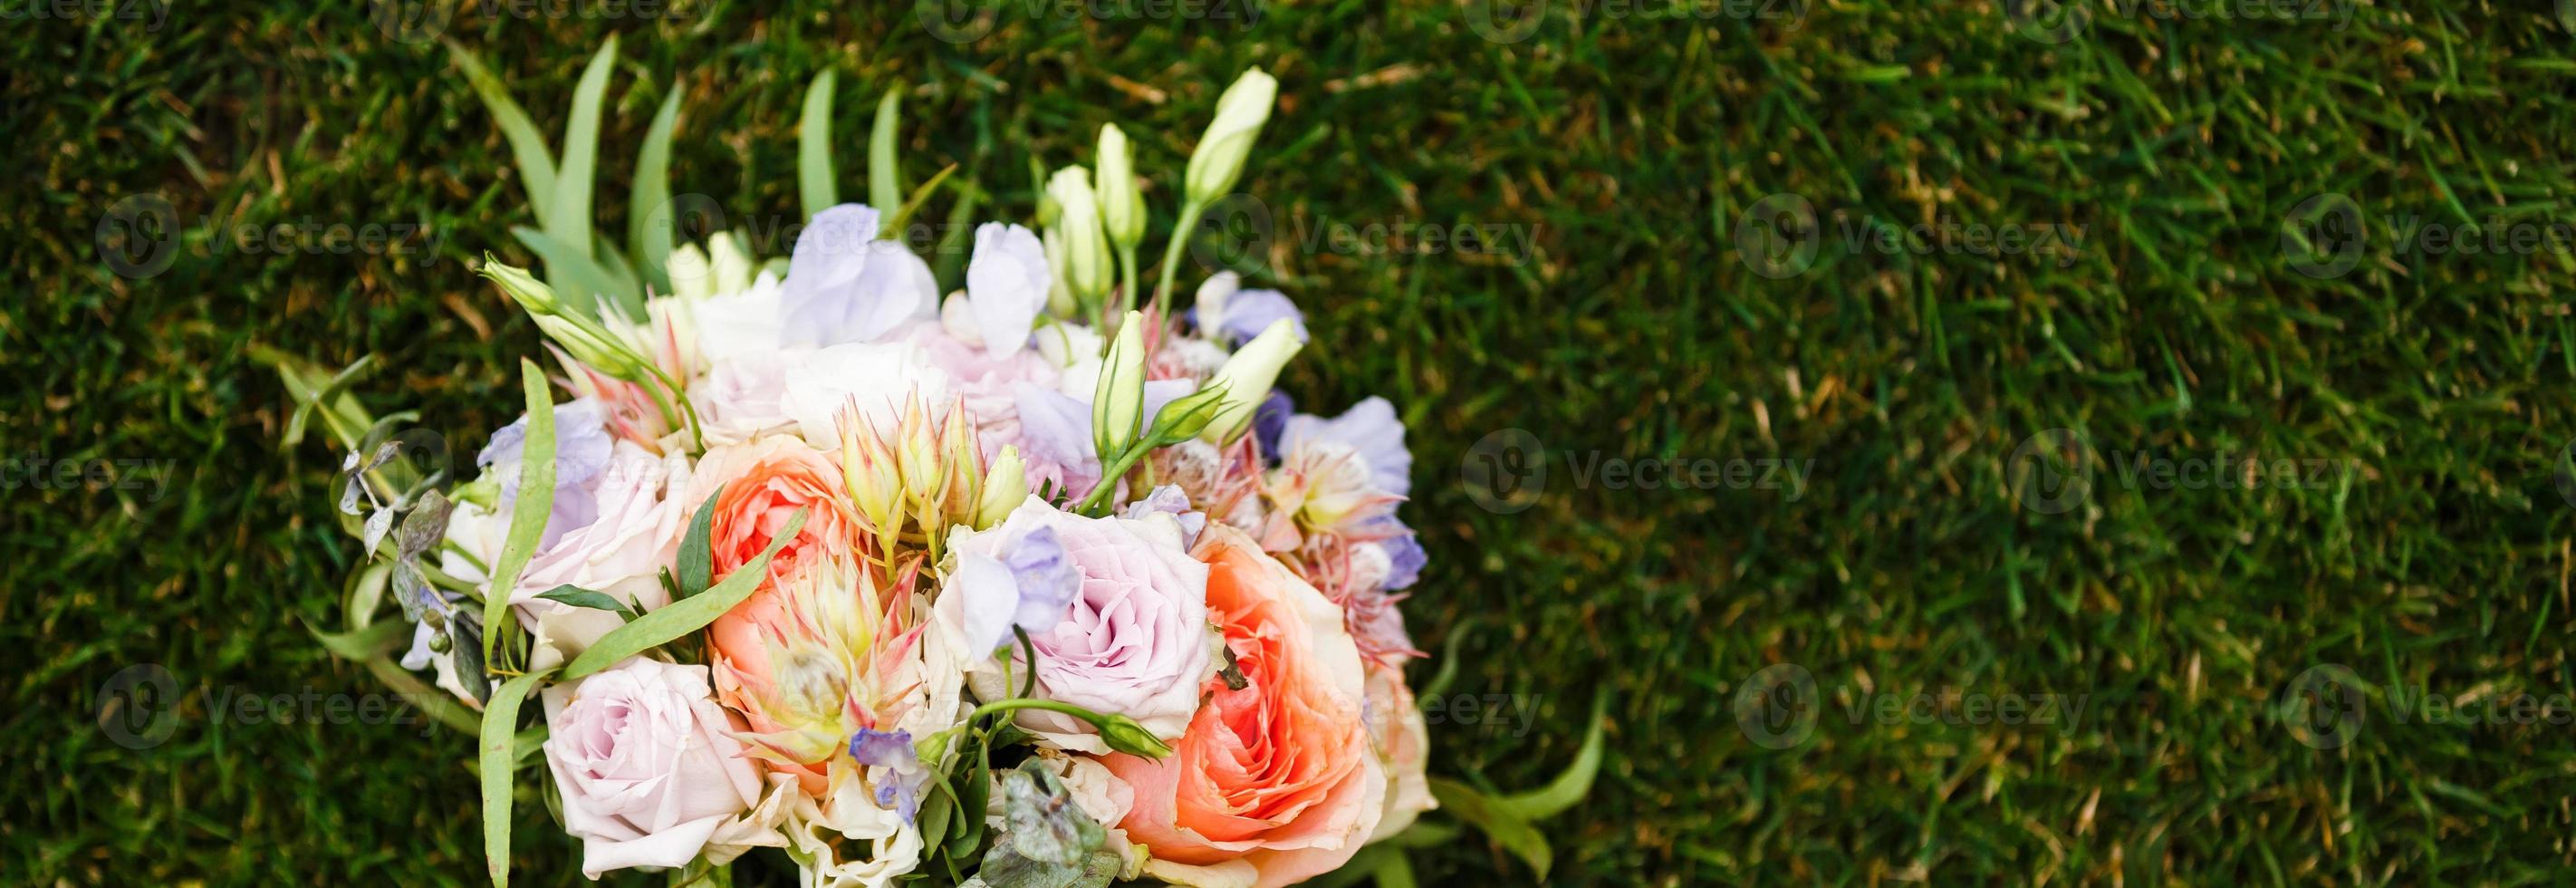 Bridal bouquet. The bride's bouquet. Bouquet of white, pink and green colors with silk ribbons of pastel color on grass background photo